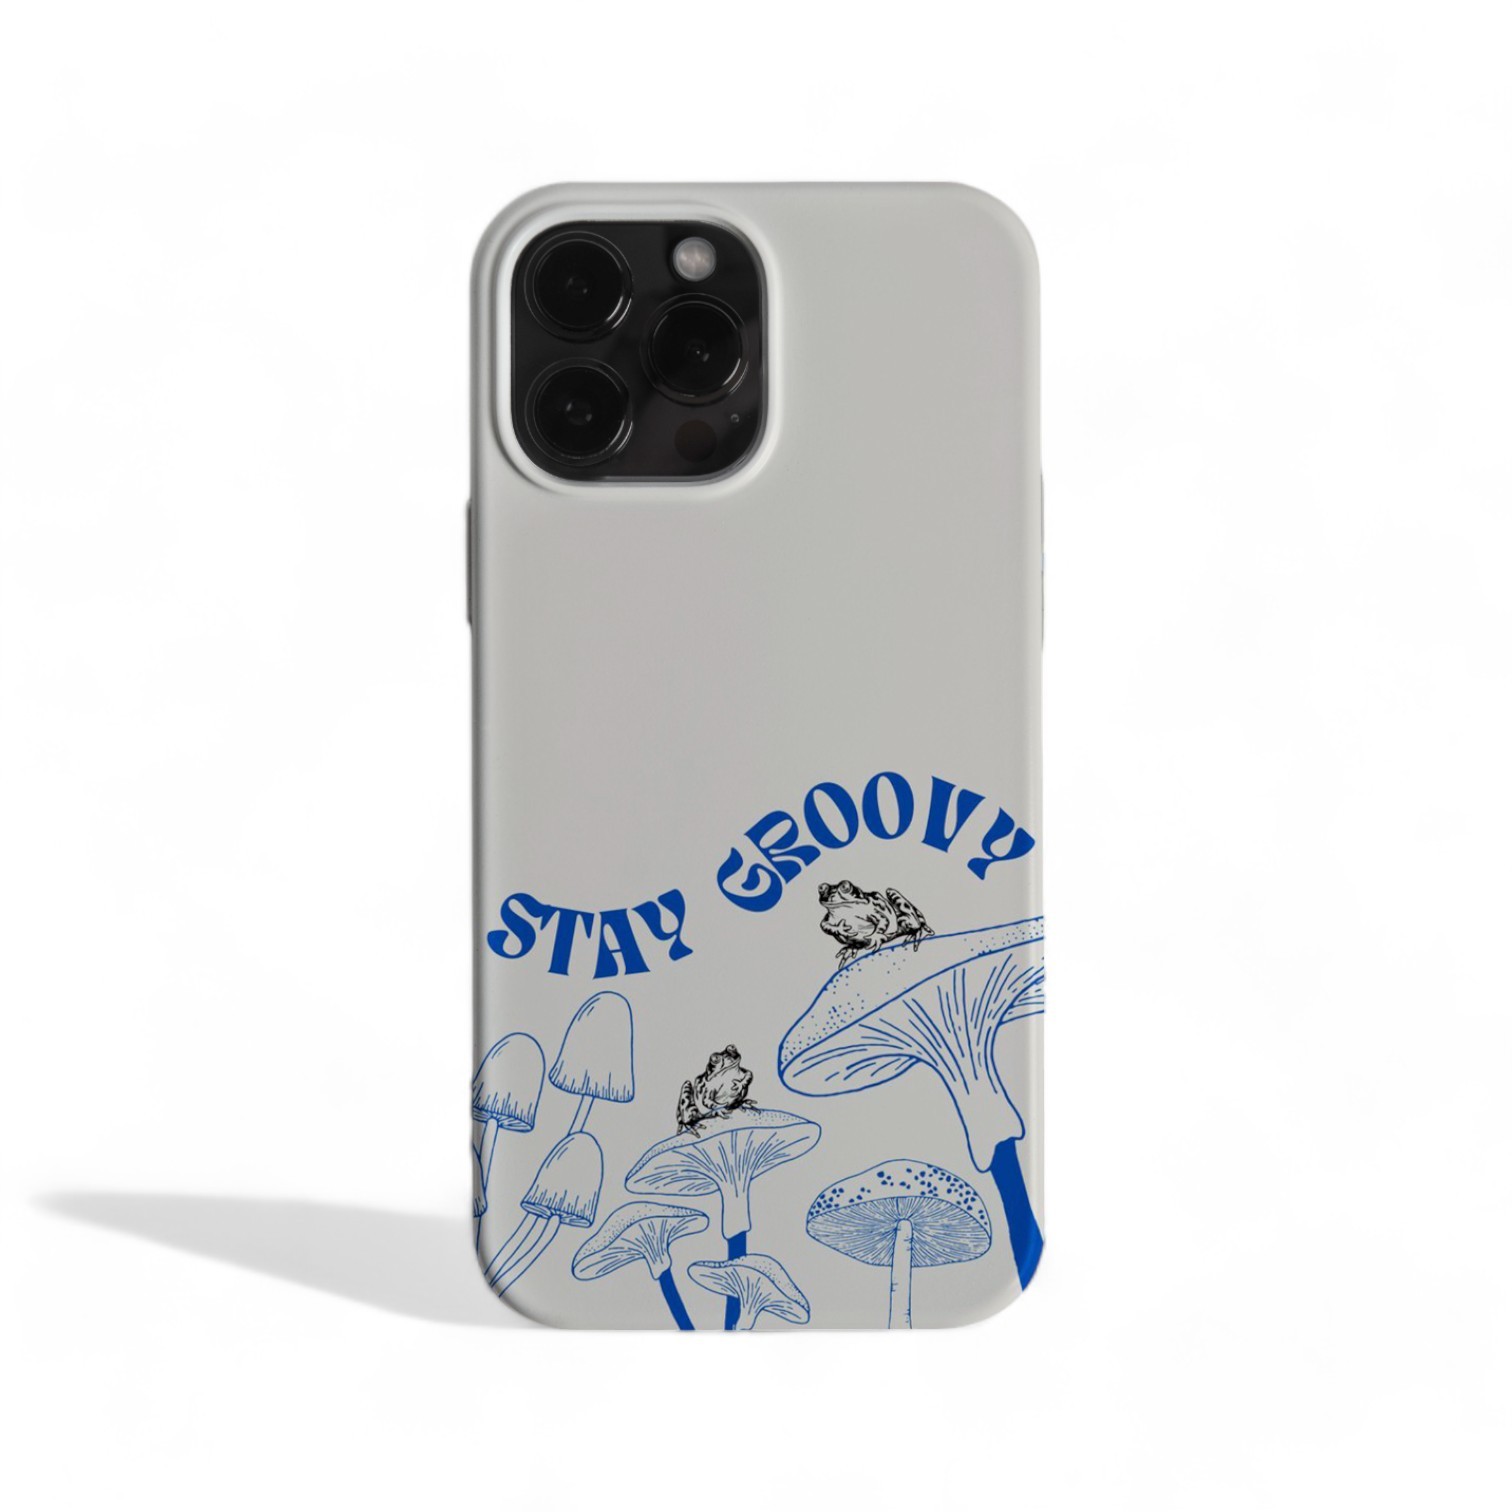 Stay Groovy Case